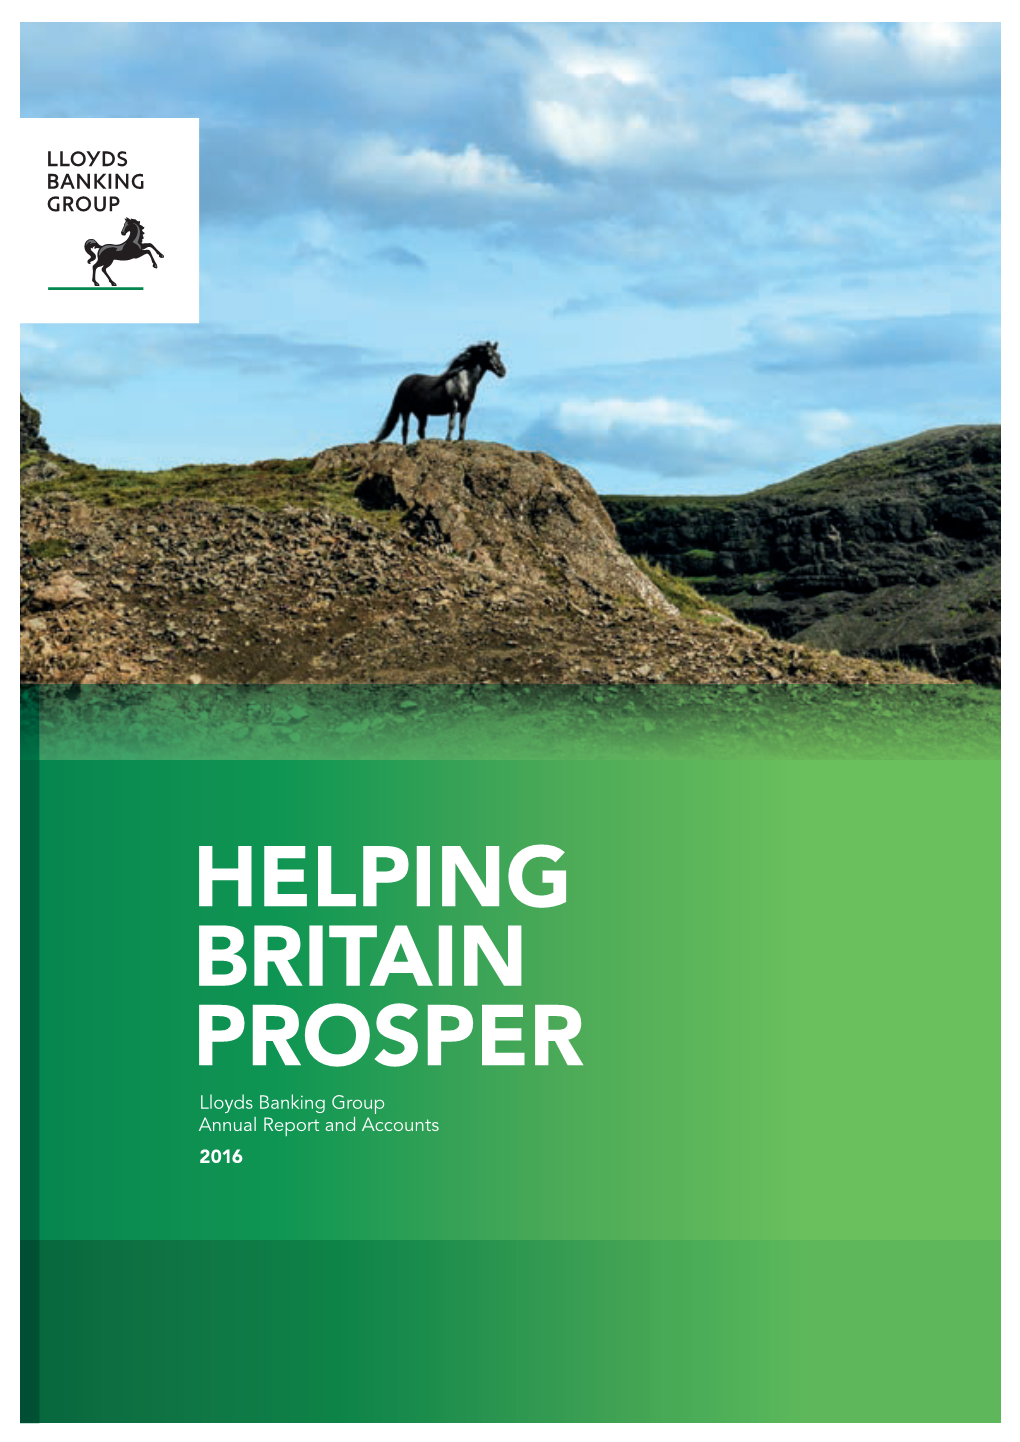 Annual Report and Accounts 2016 Lloyds Banking Group How We're Helping Britain Prosper